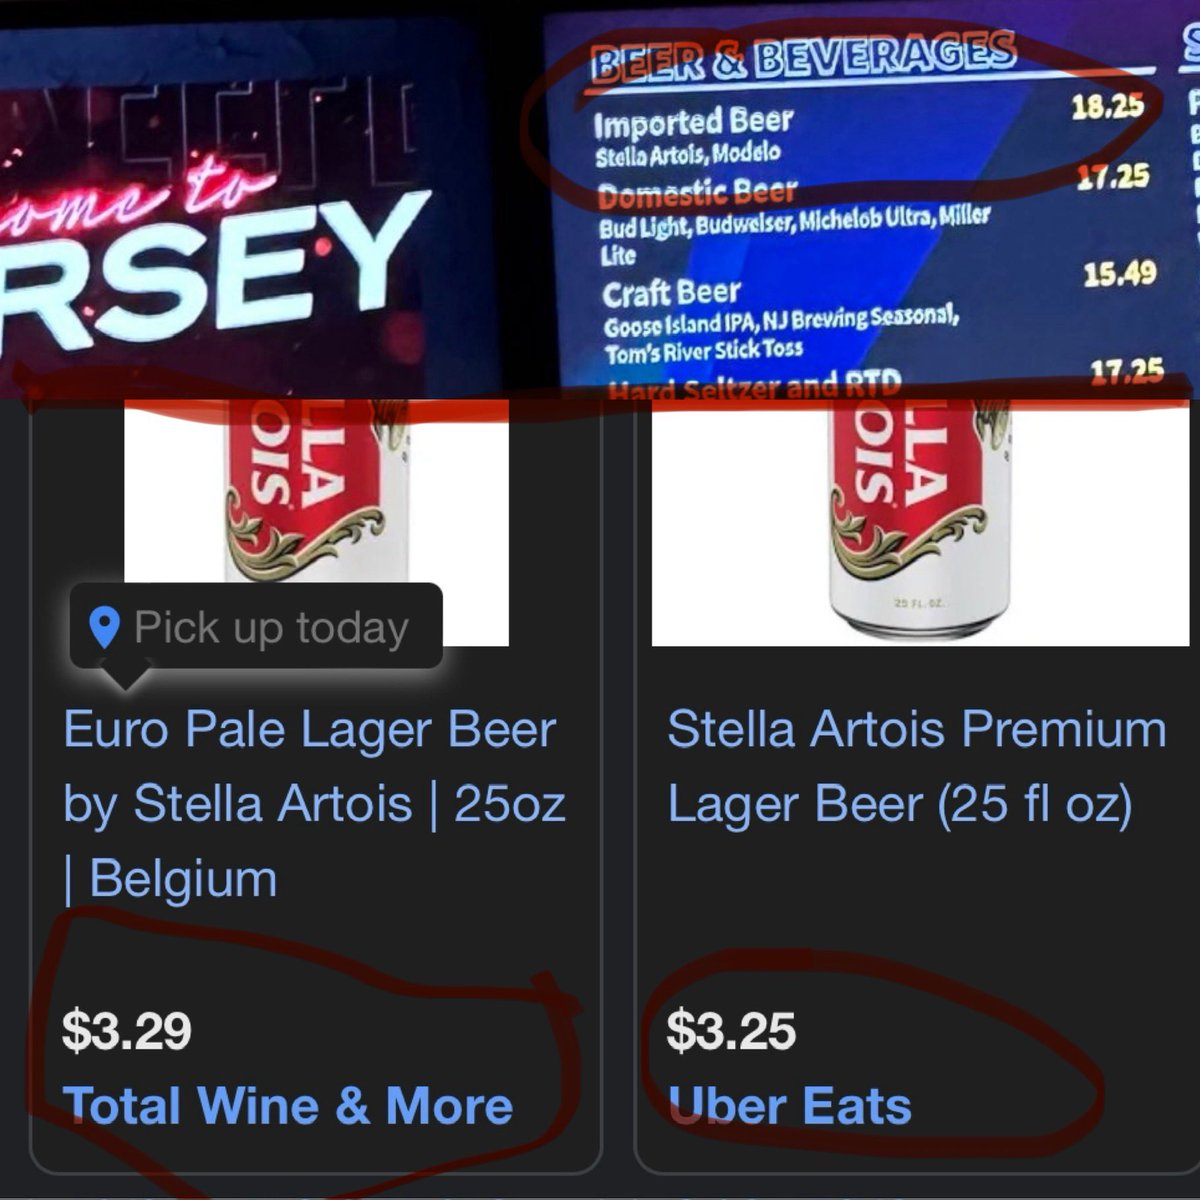 This is a joke right? Having a beverage at Prudential Center constitutes a $15 markup from the profits our local businesses are making? I get there will be some markup at a venue but $15 more?!?! When does it stop?!?!